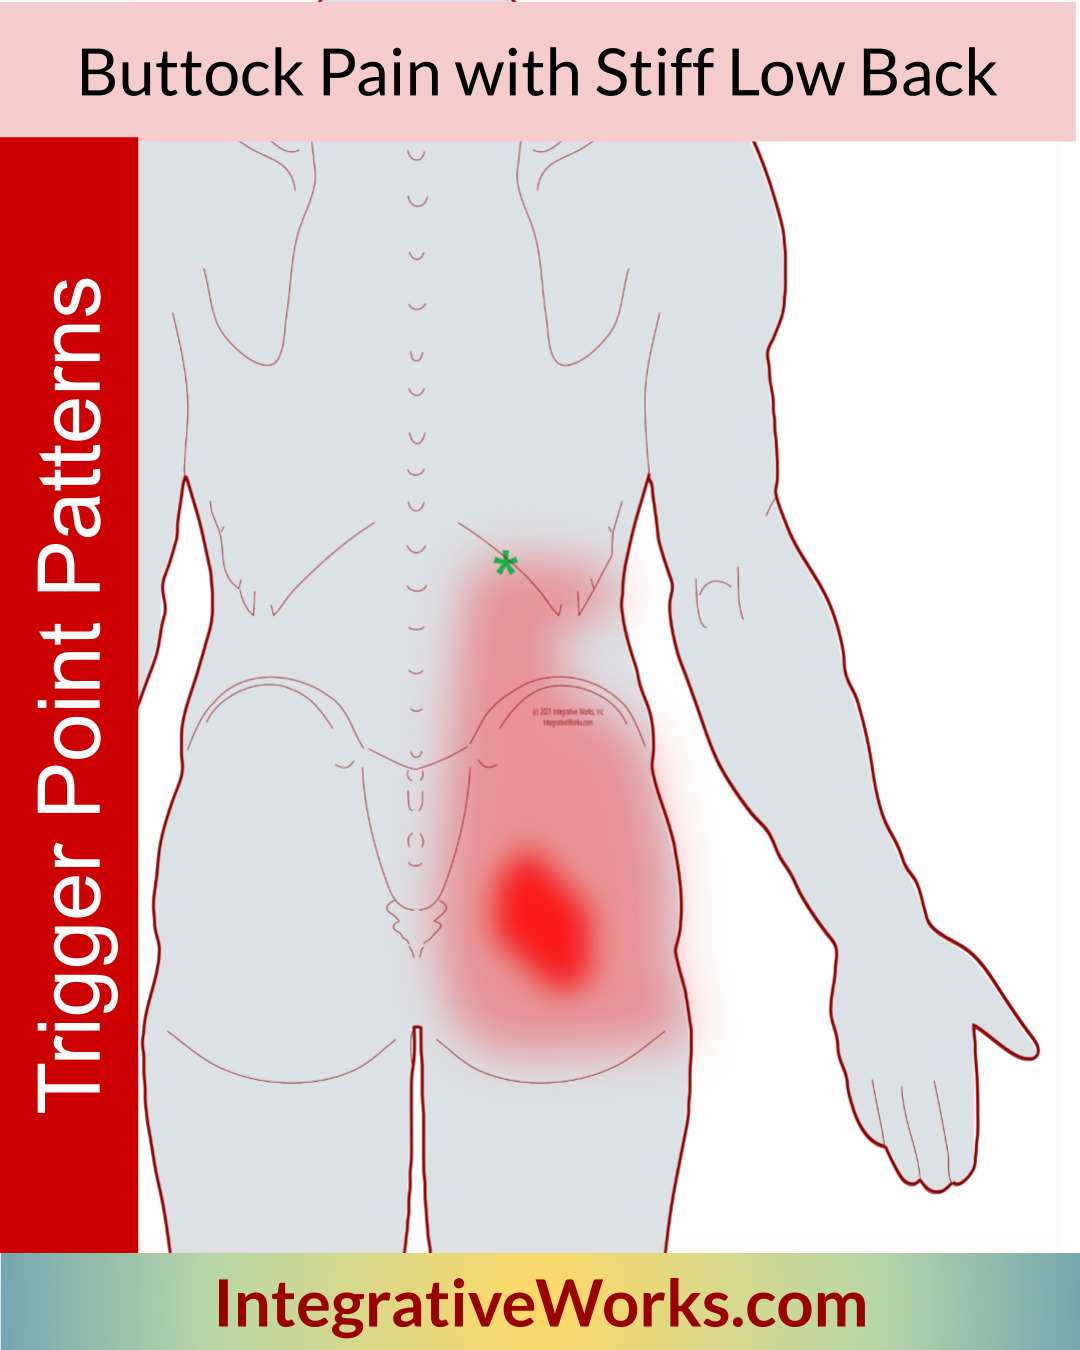 Buttock Pain with Stiff Low Back